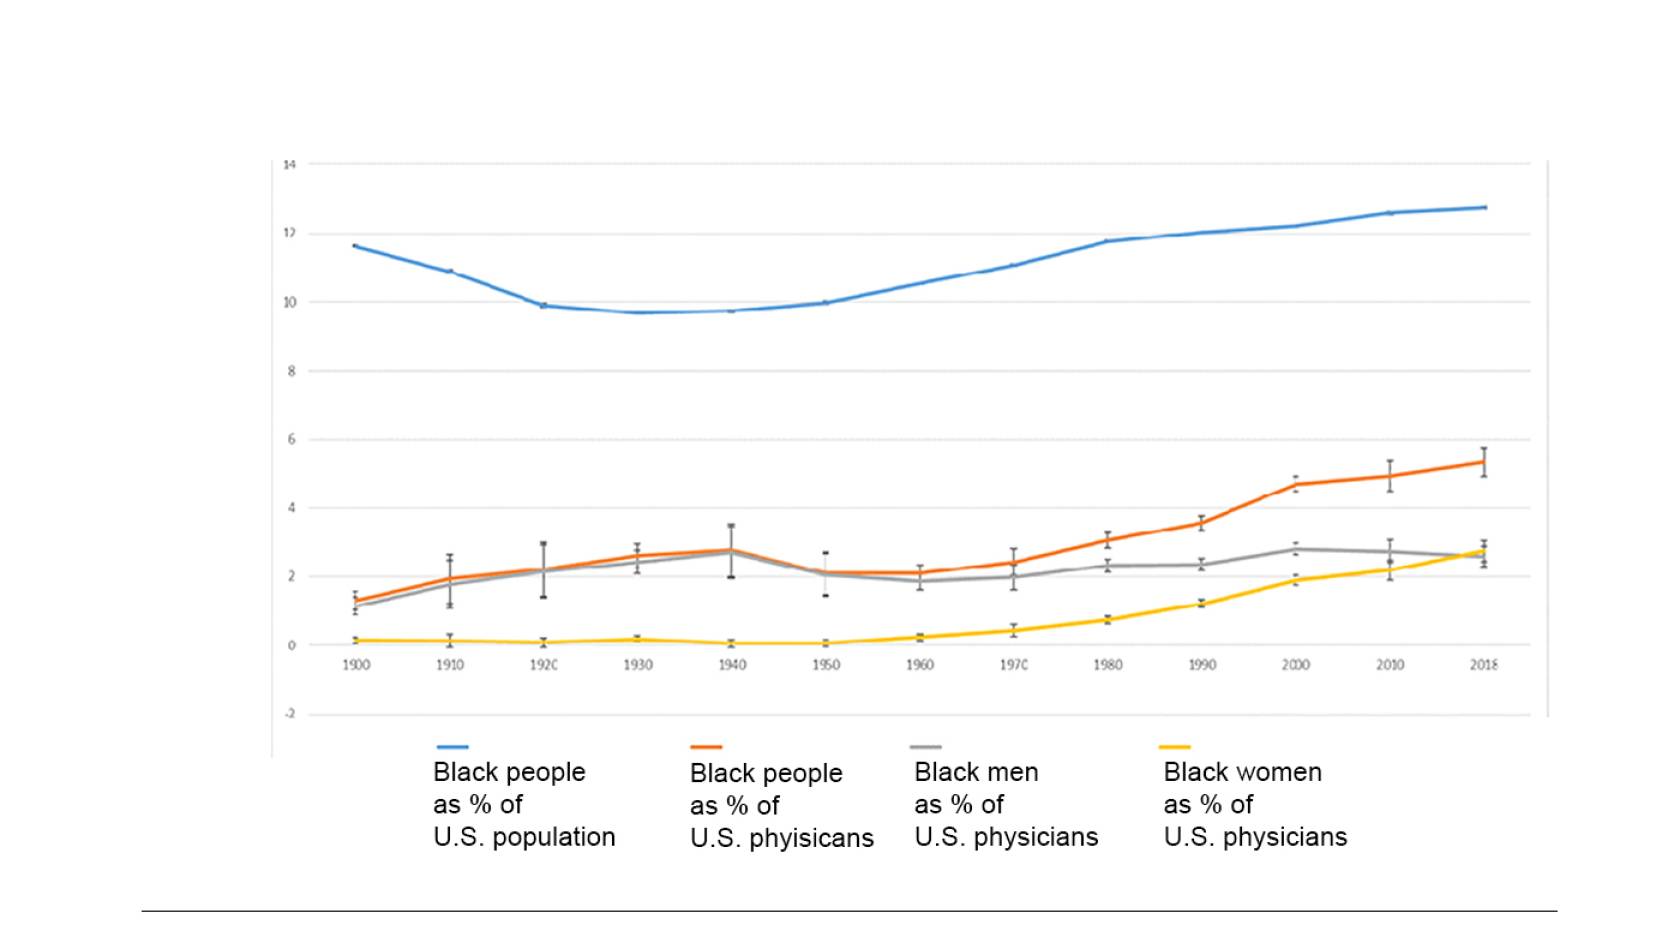 Chart showing the percentage of Black physicians in relation to the population since 1900.